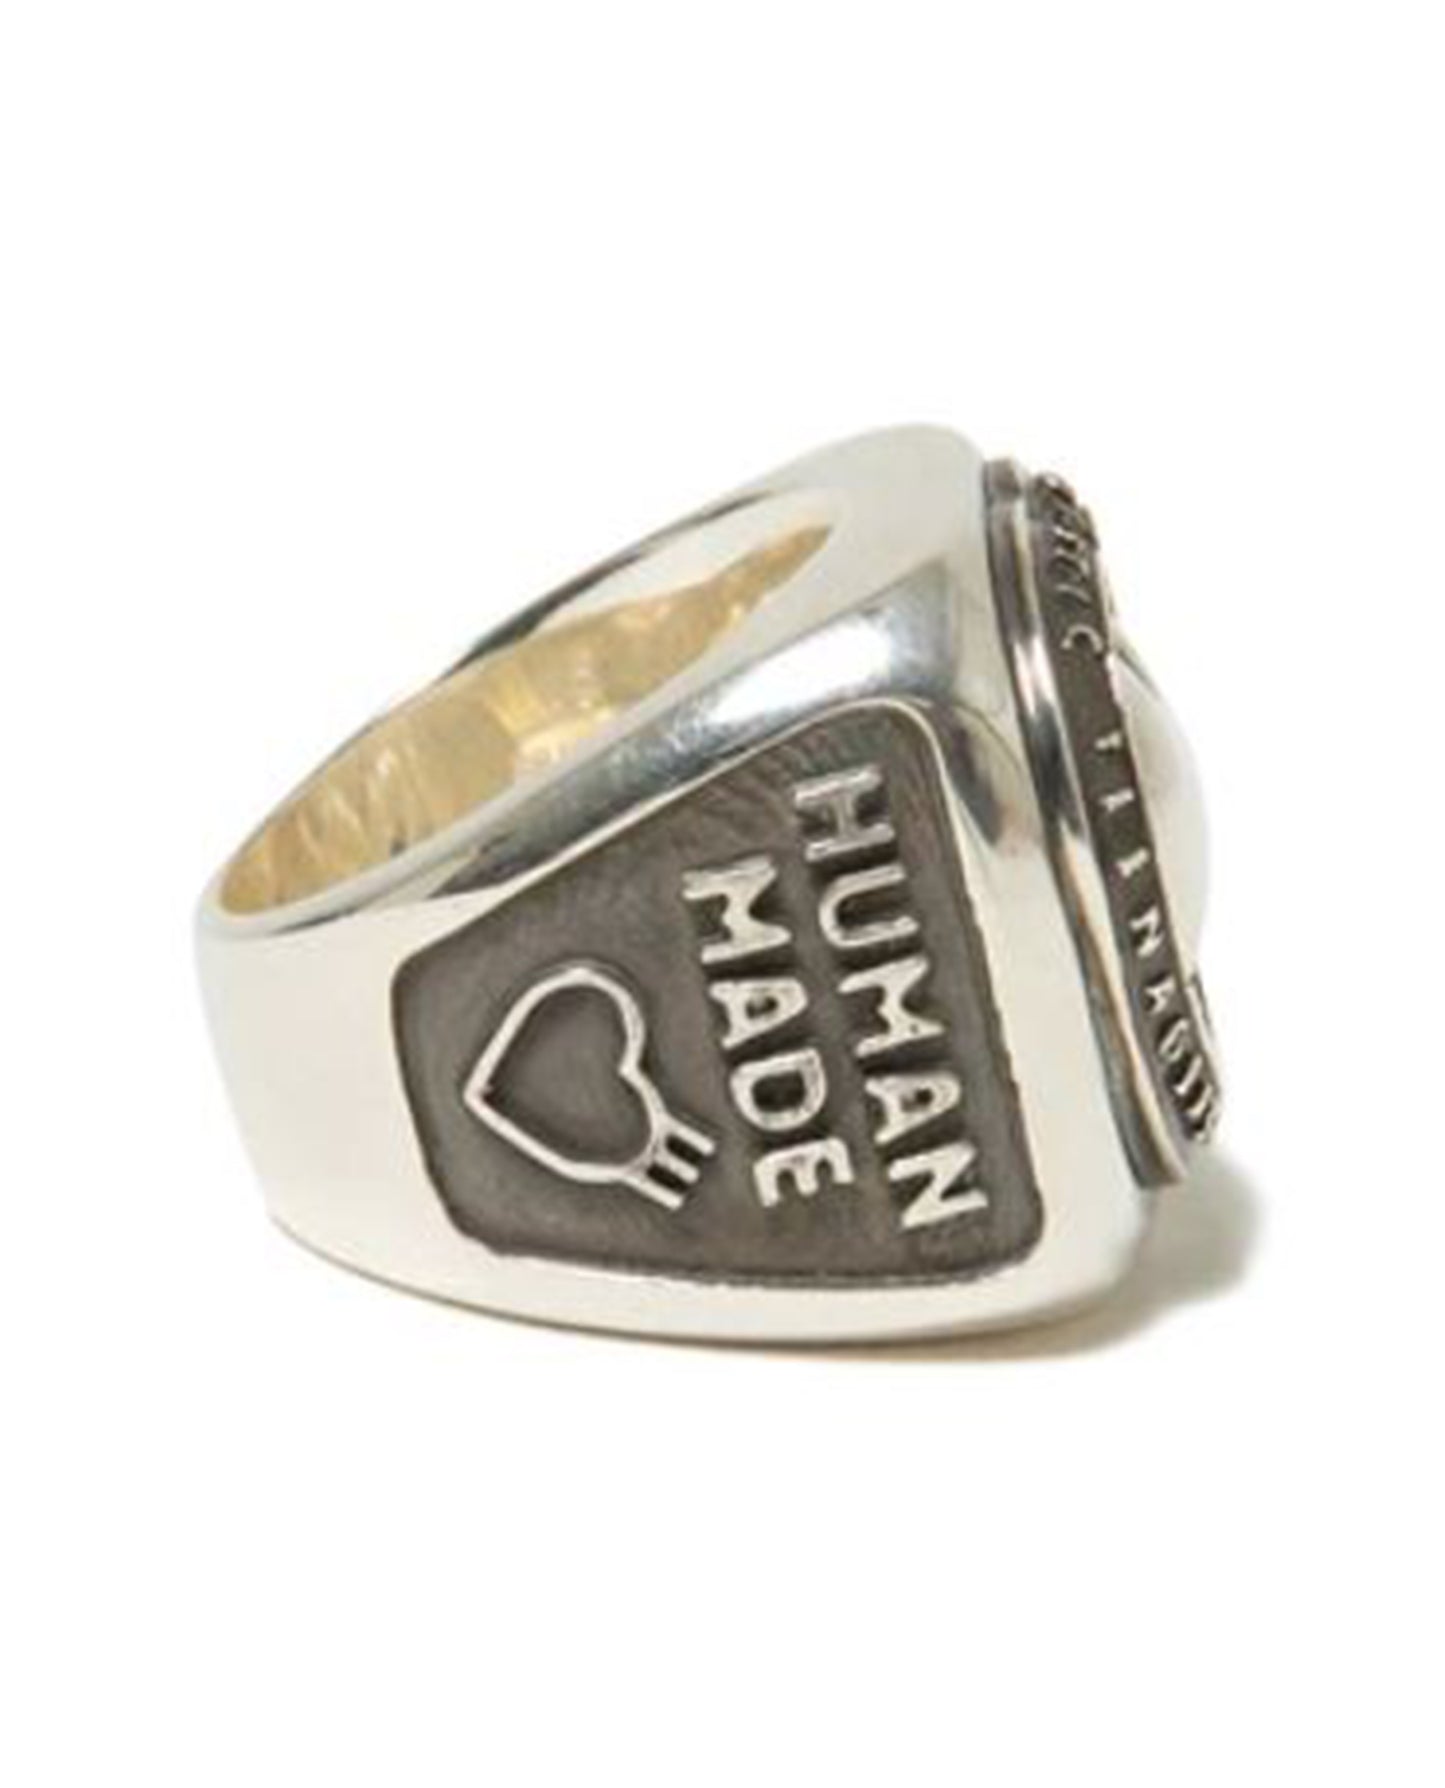 HUMAN MADE HEART COLLEGE RING - WHITE